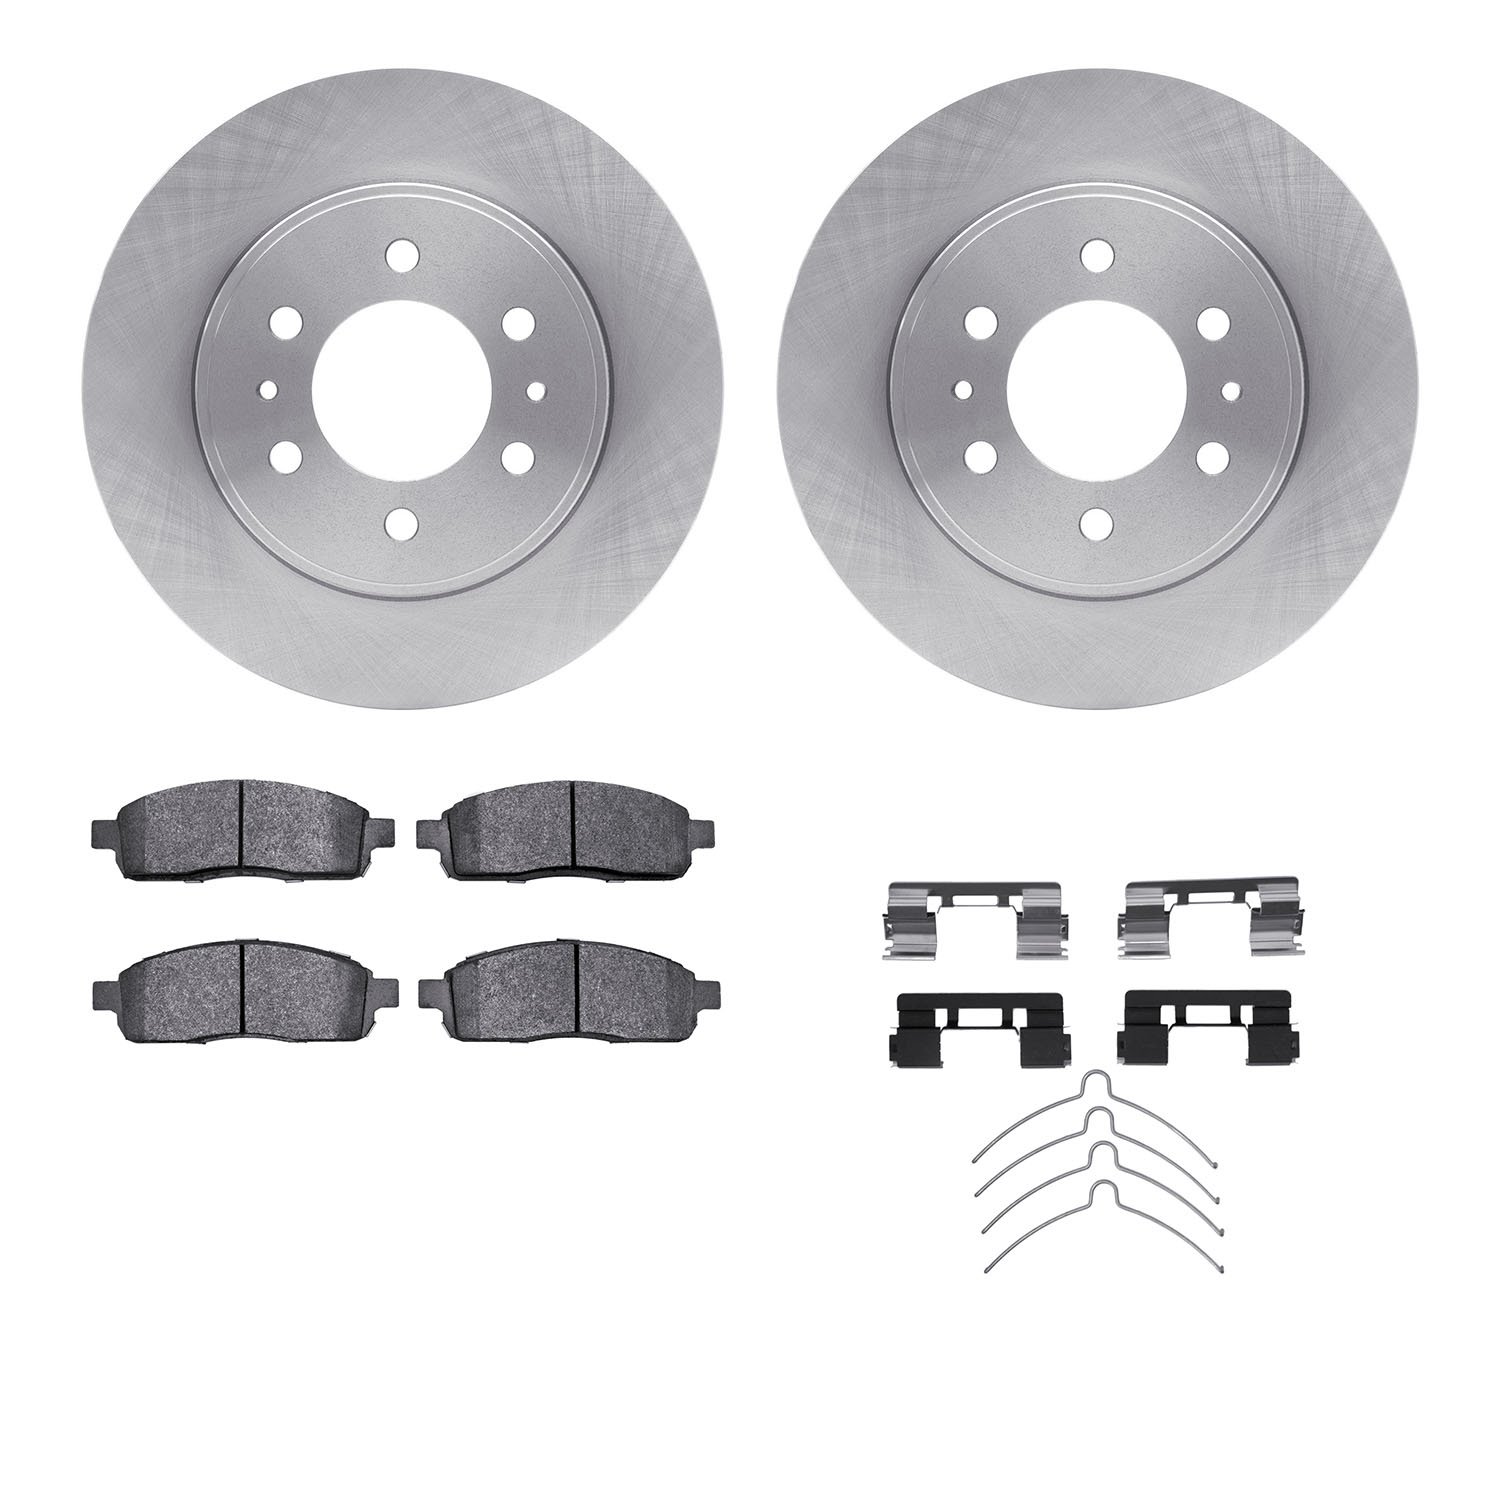 6412-54278 Brake Rotors with Ultimate-Duty Brake Pads Kit & Hardware, 2009-2009 Ford/Lincoln/Mercury/Mazda, Position: Front